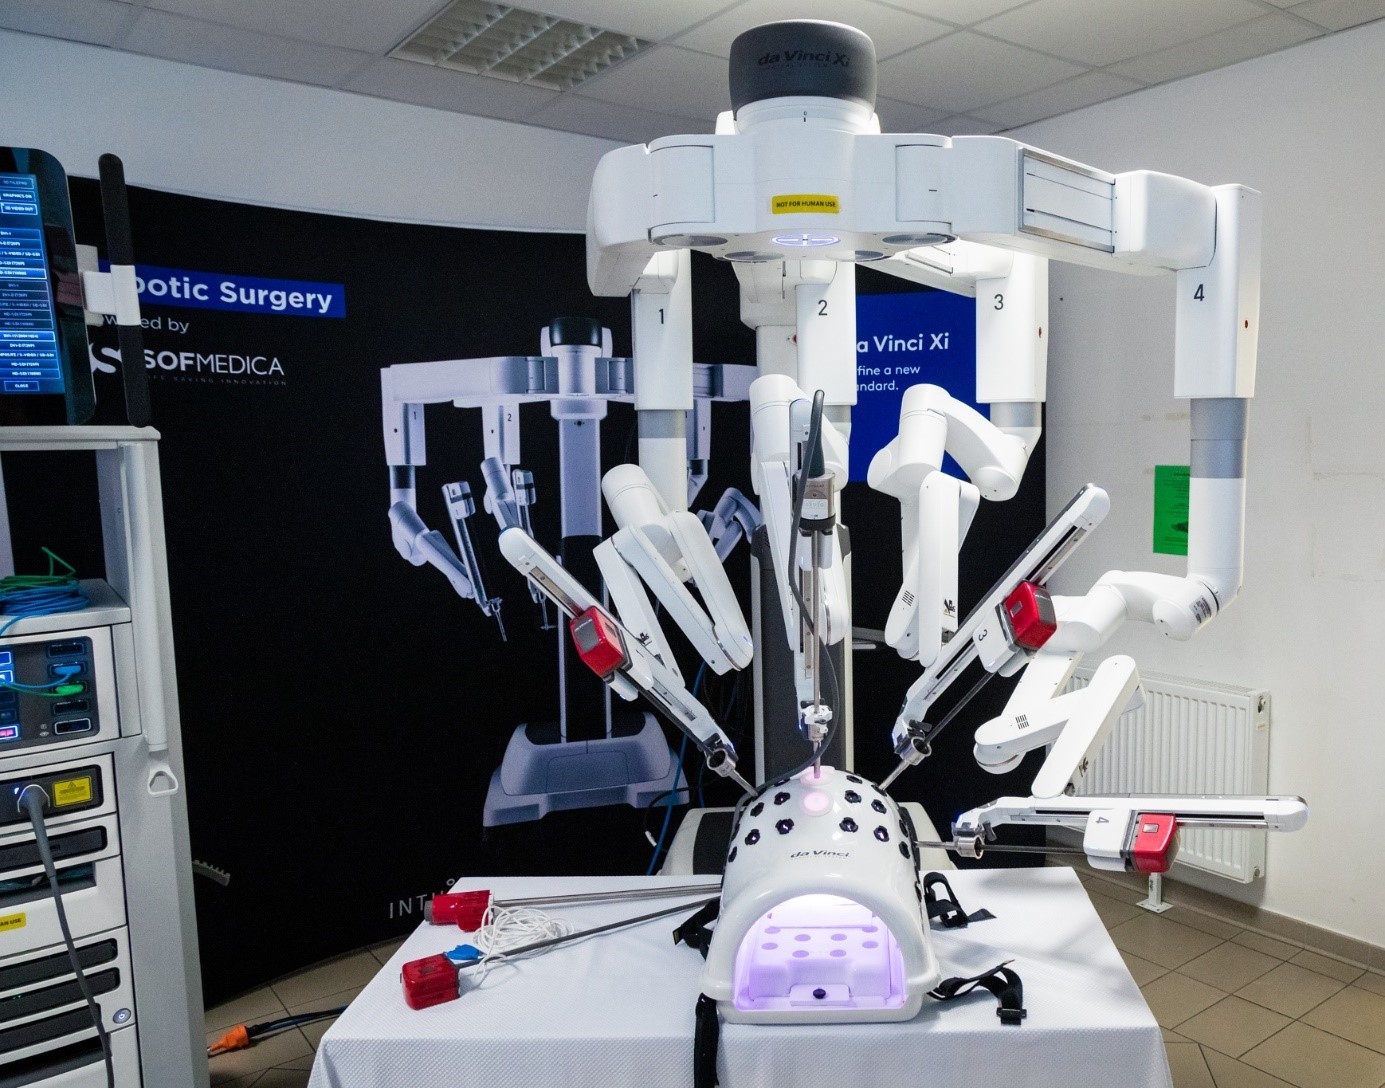 experts-from-the-petz-hospital-in-gyor-and-szechenyi-university-presented-the-surgical-robot (2).jpg